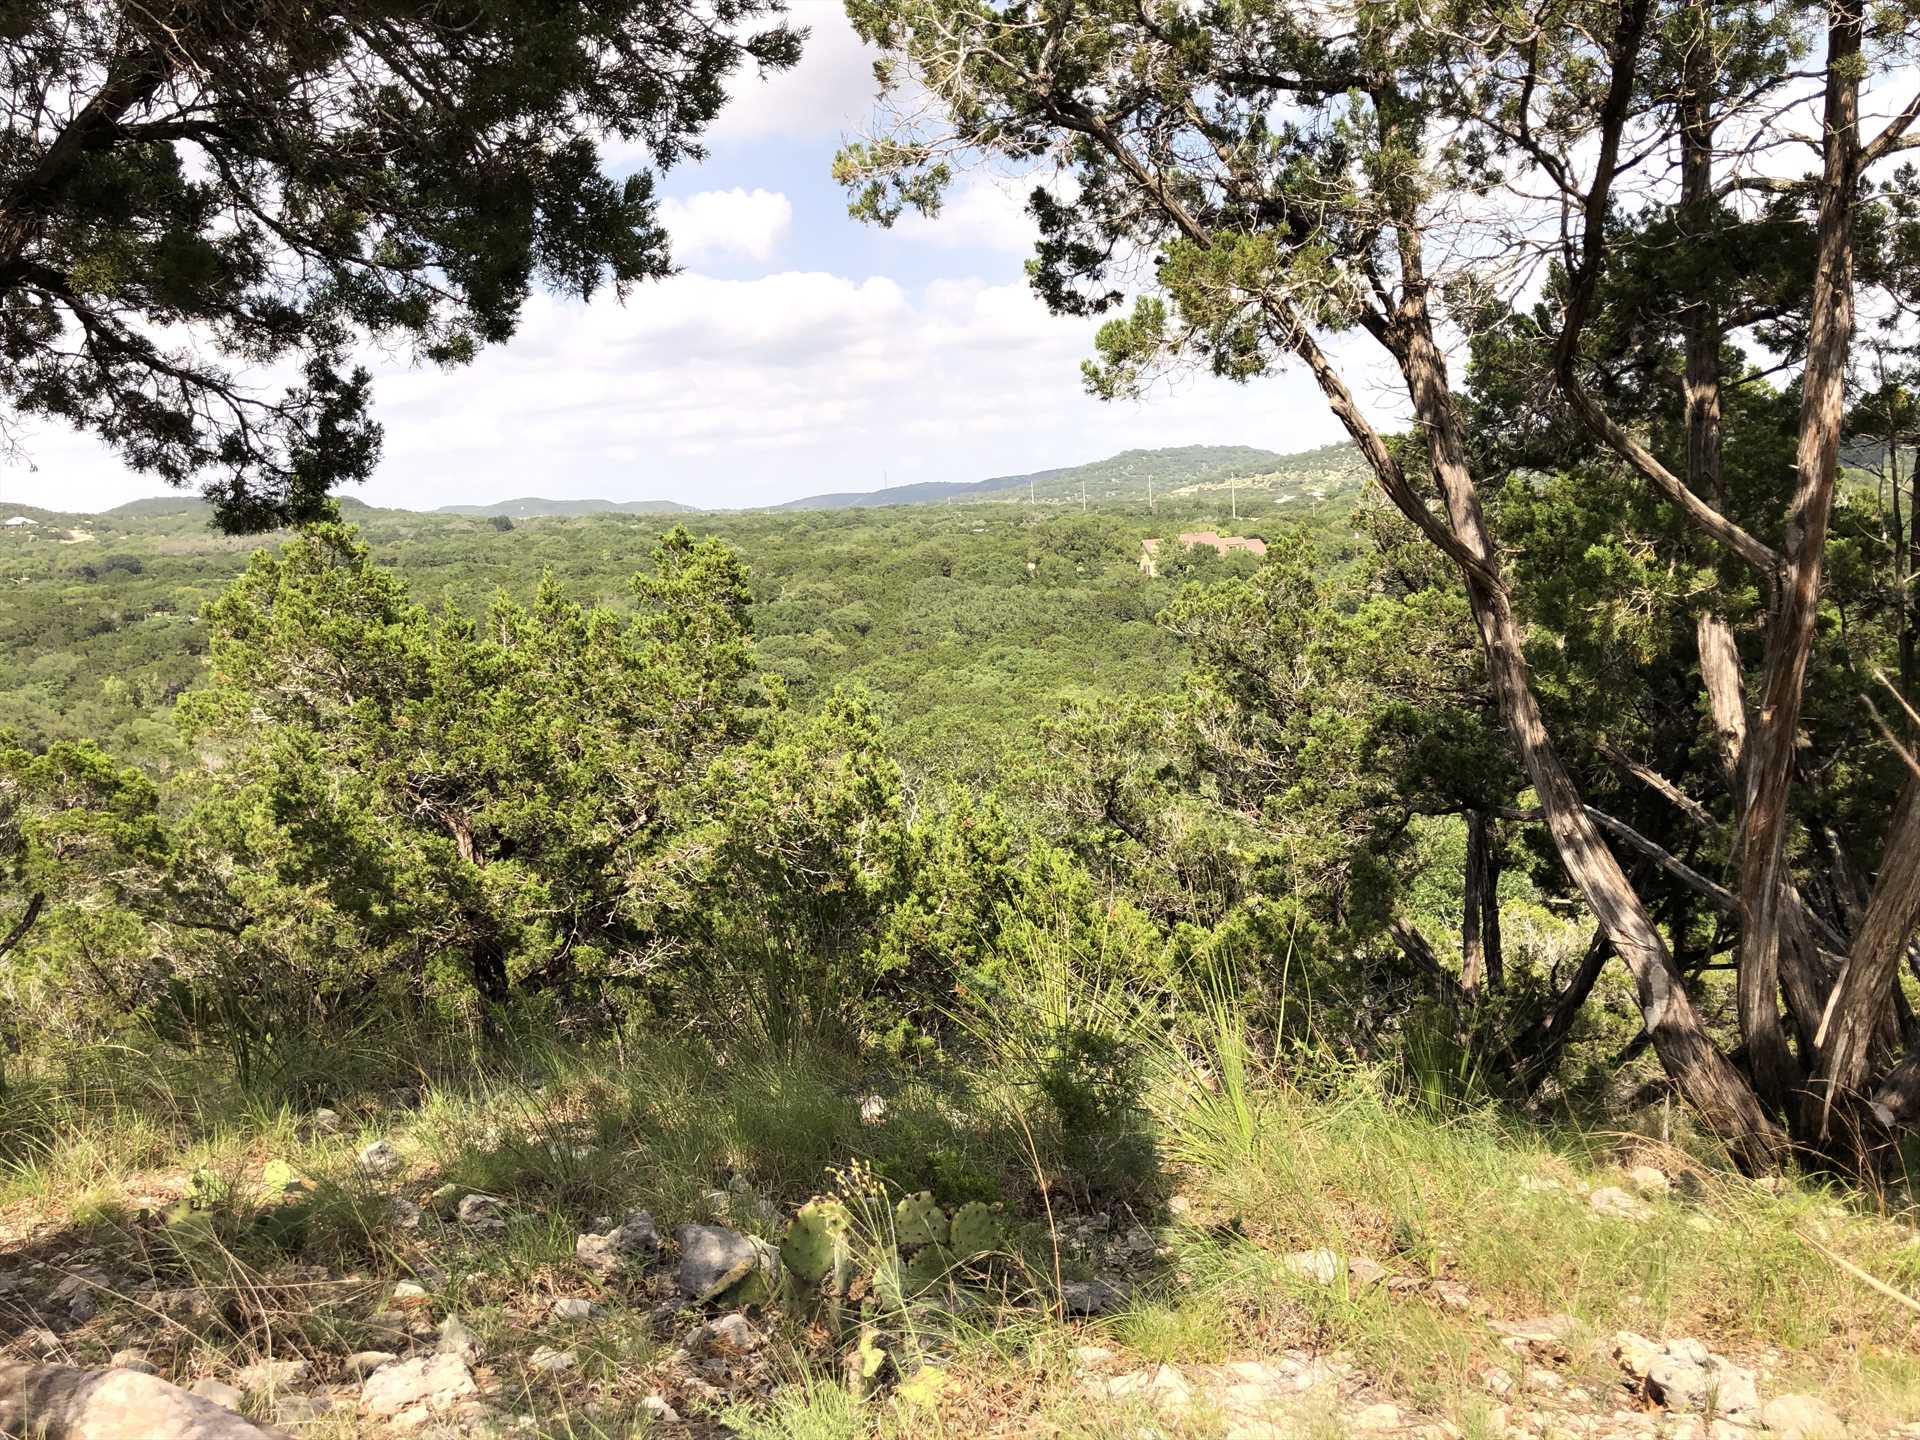                                                 Kick back and admire the wildlife, sunsets, glittering night skies, and Hill Country views that seem to go on forever!